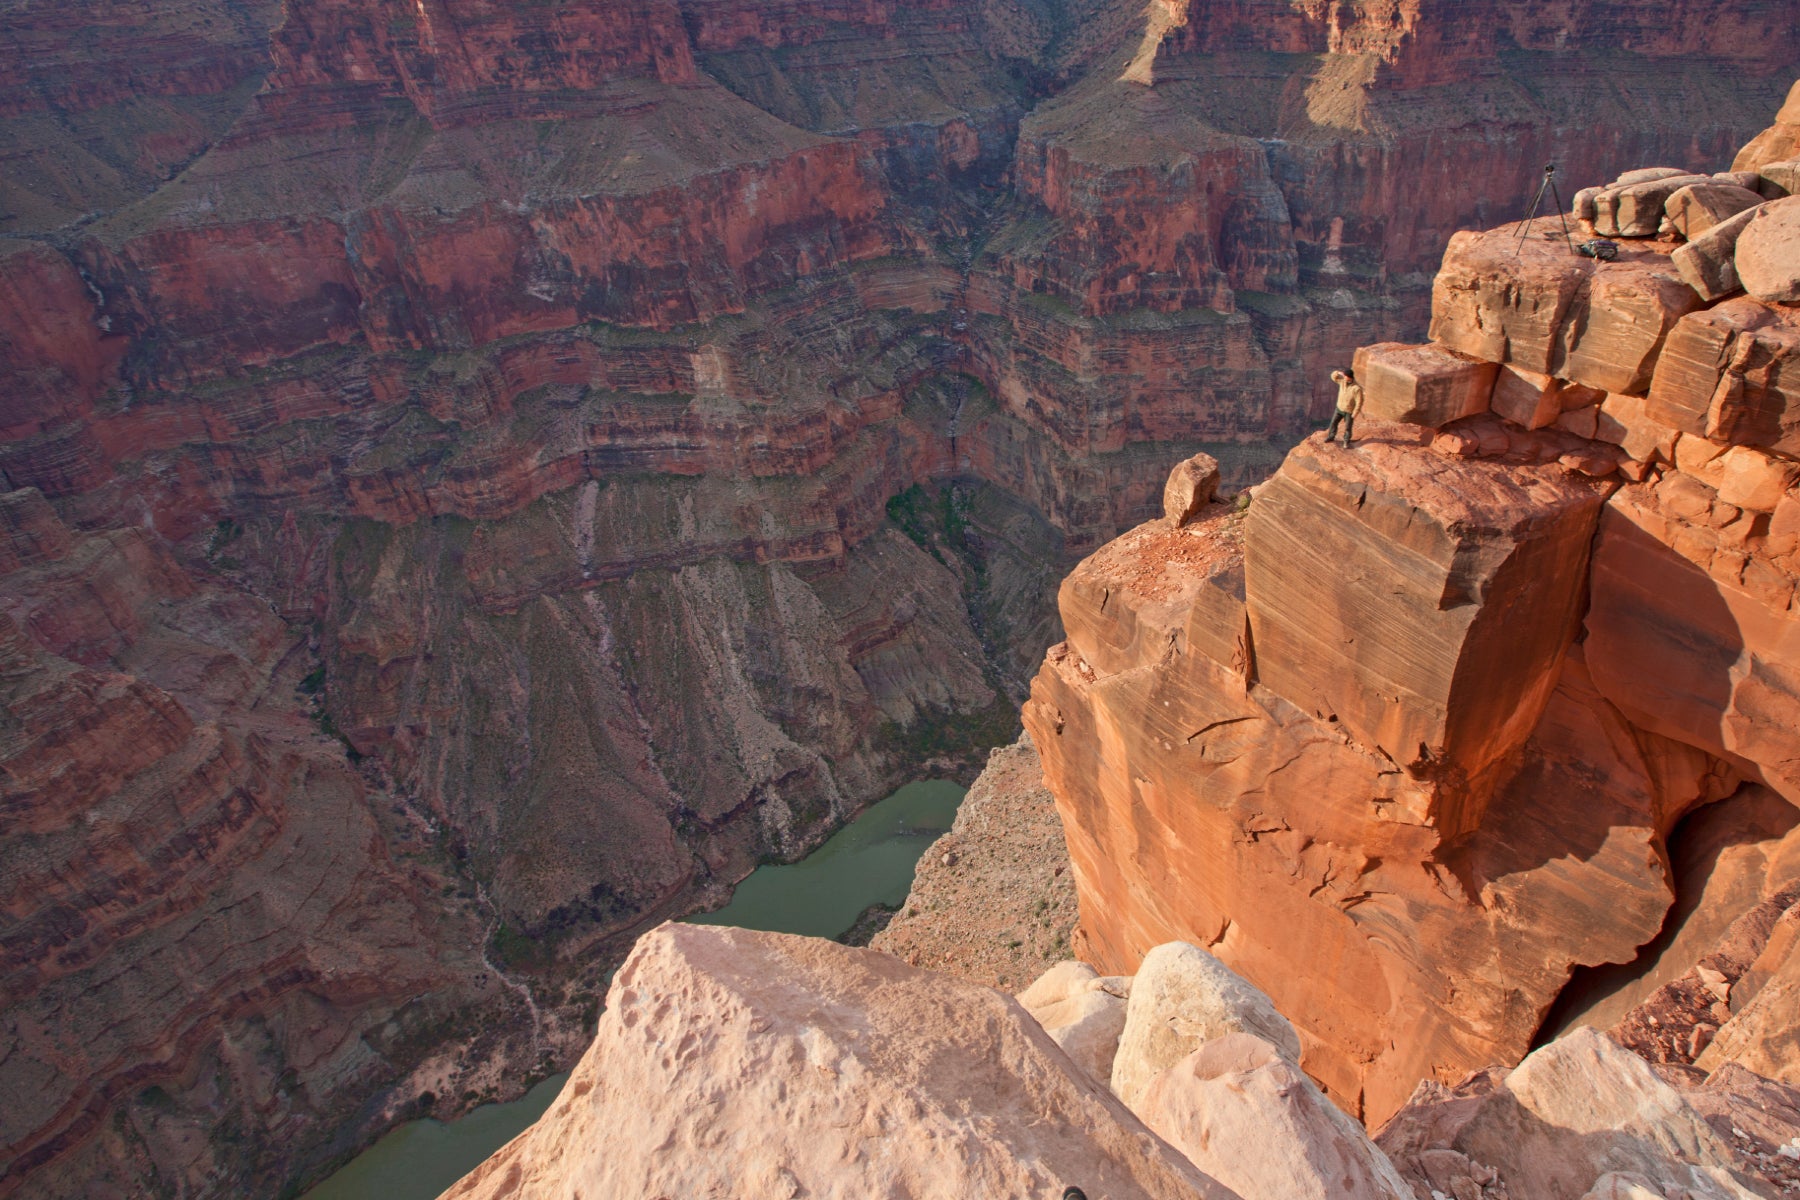 Portrait of Peter Lik standing on the cliffs of Toroweap Overlook at the Grand Canyon National Park in Arizona.